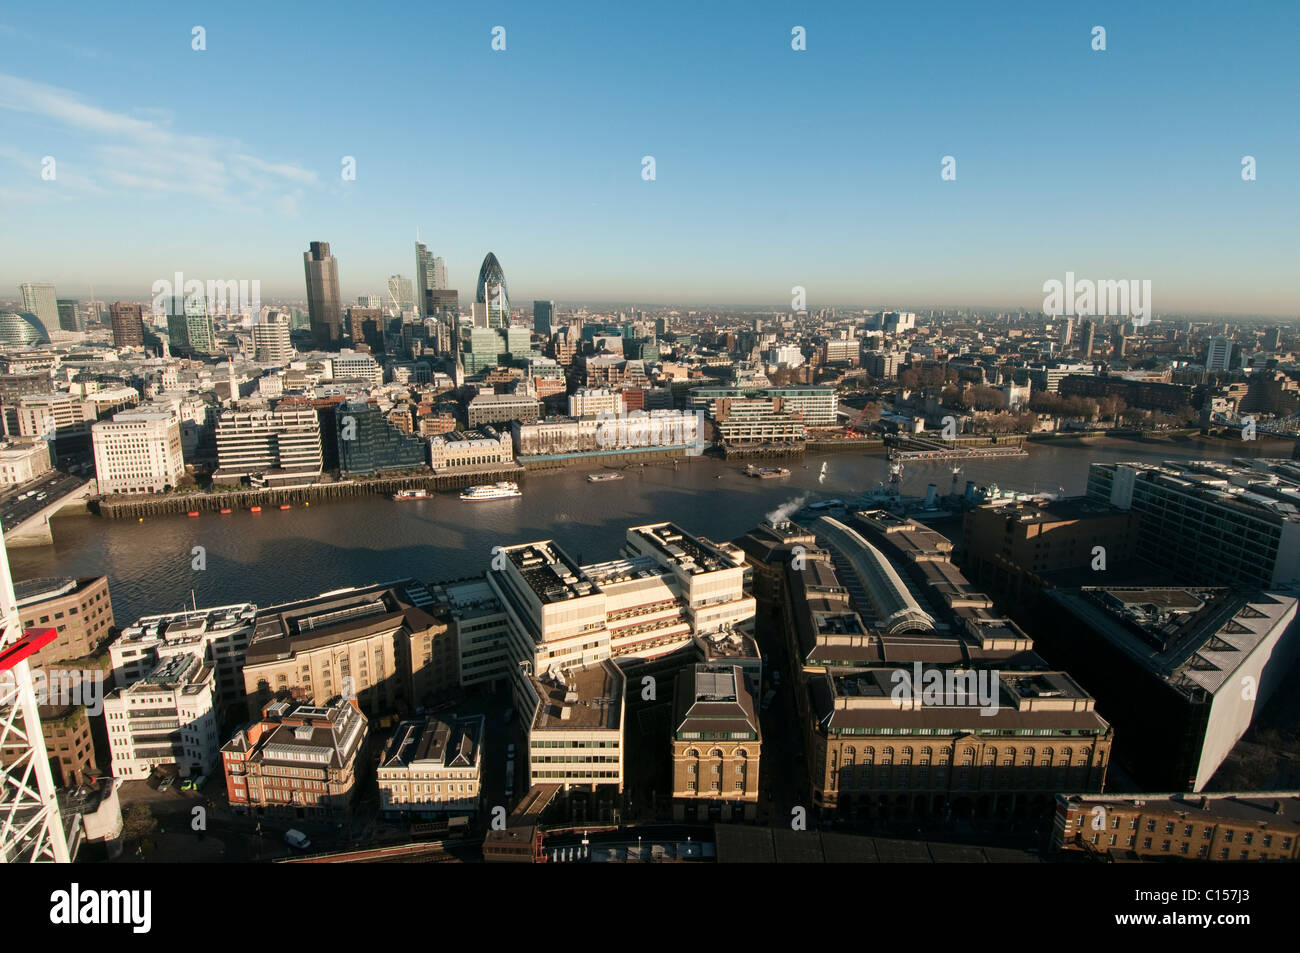 Views of London from an aerial vantage point. Stock Photo